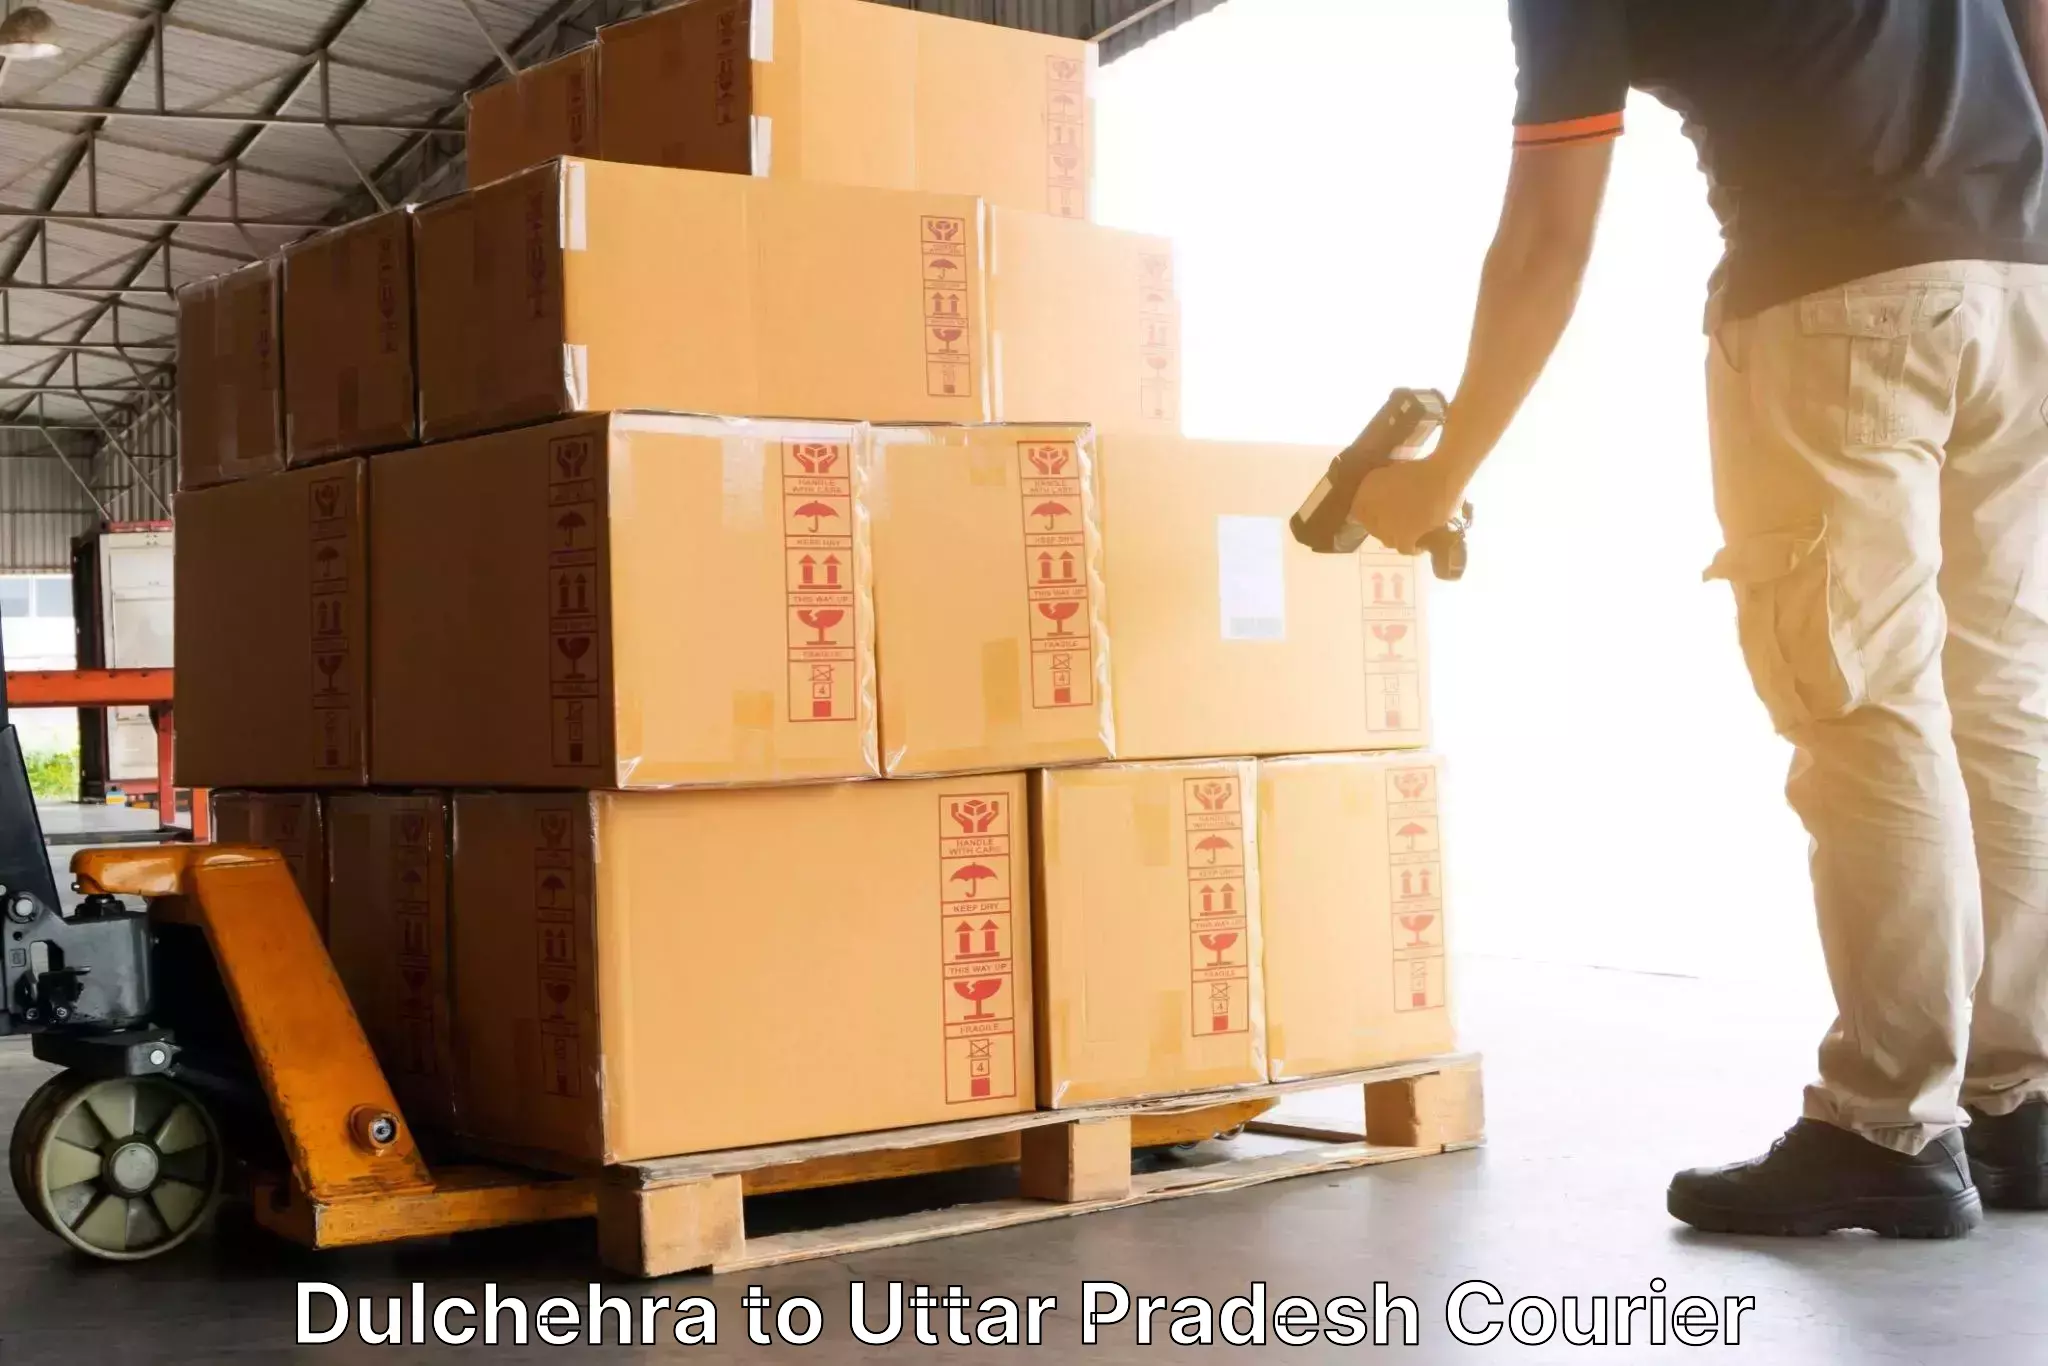 Package delivery network Dulchehra to Khaga